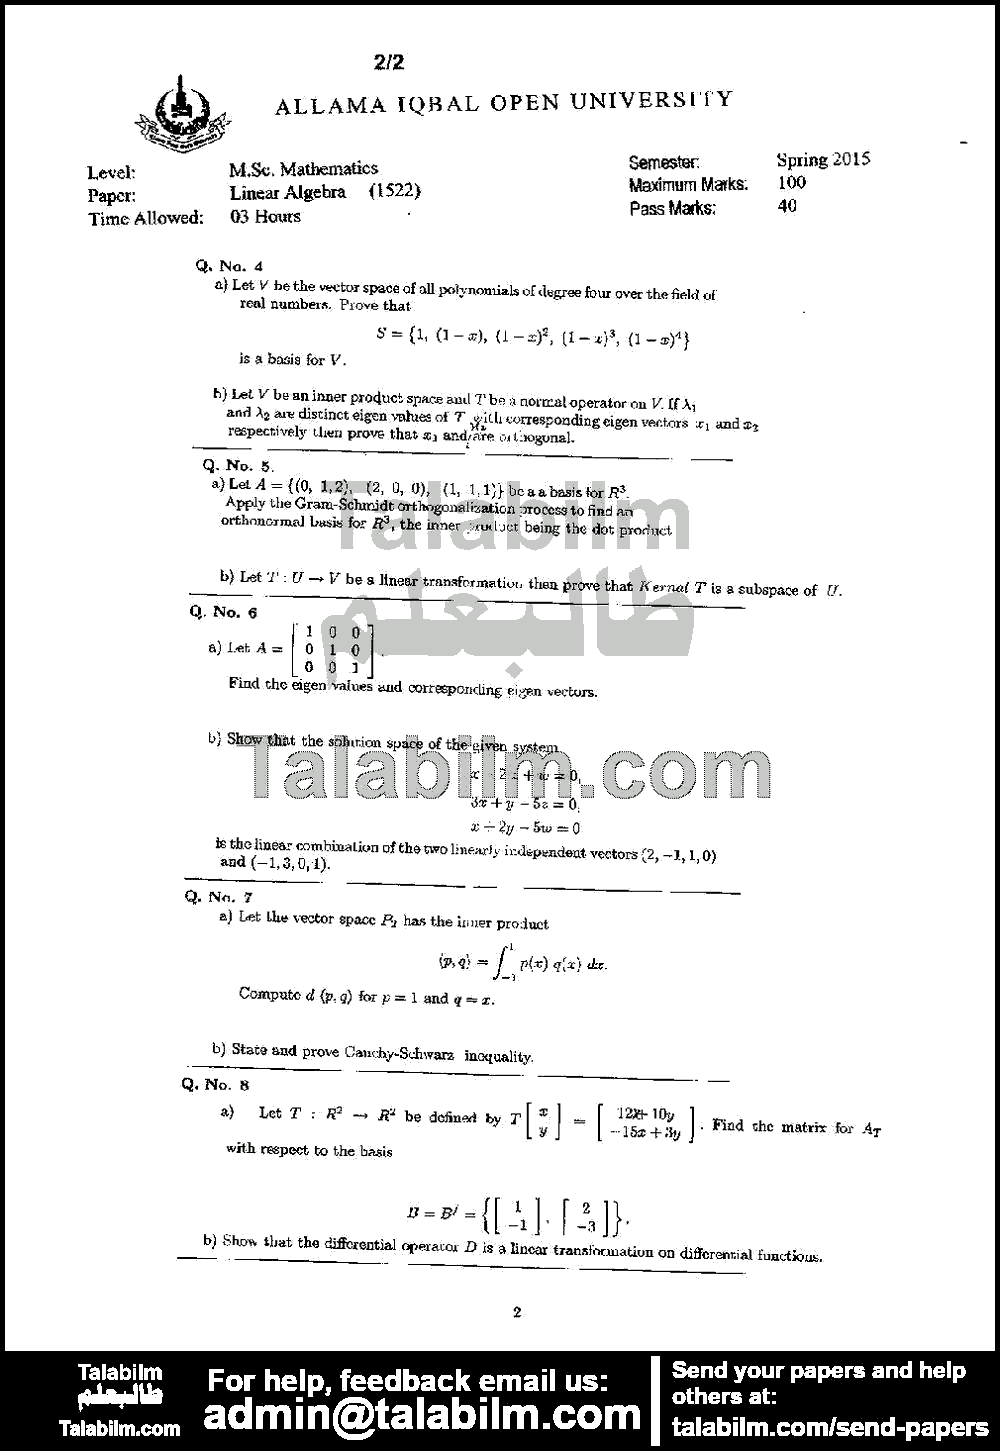 Linear Algebra 1522 past paper for Spring 2015 Page No. 2